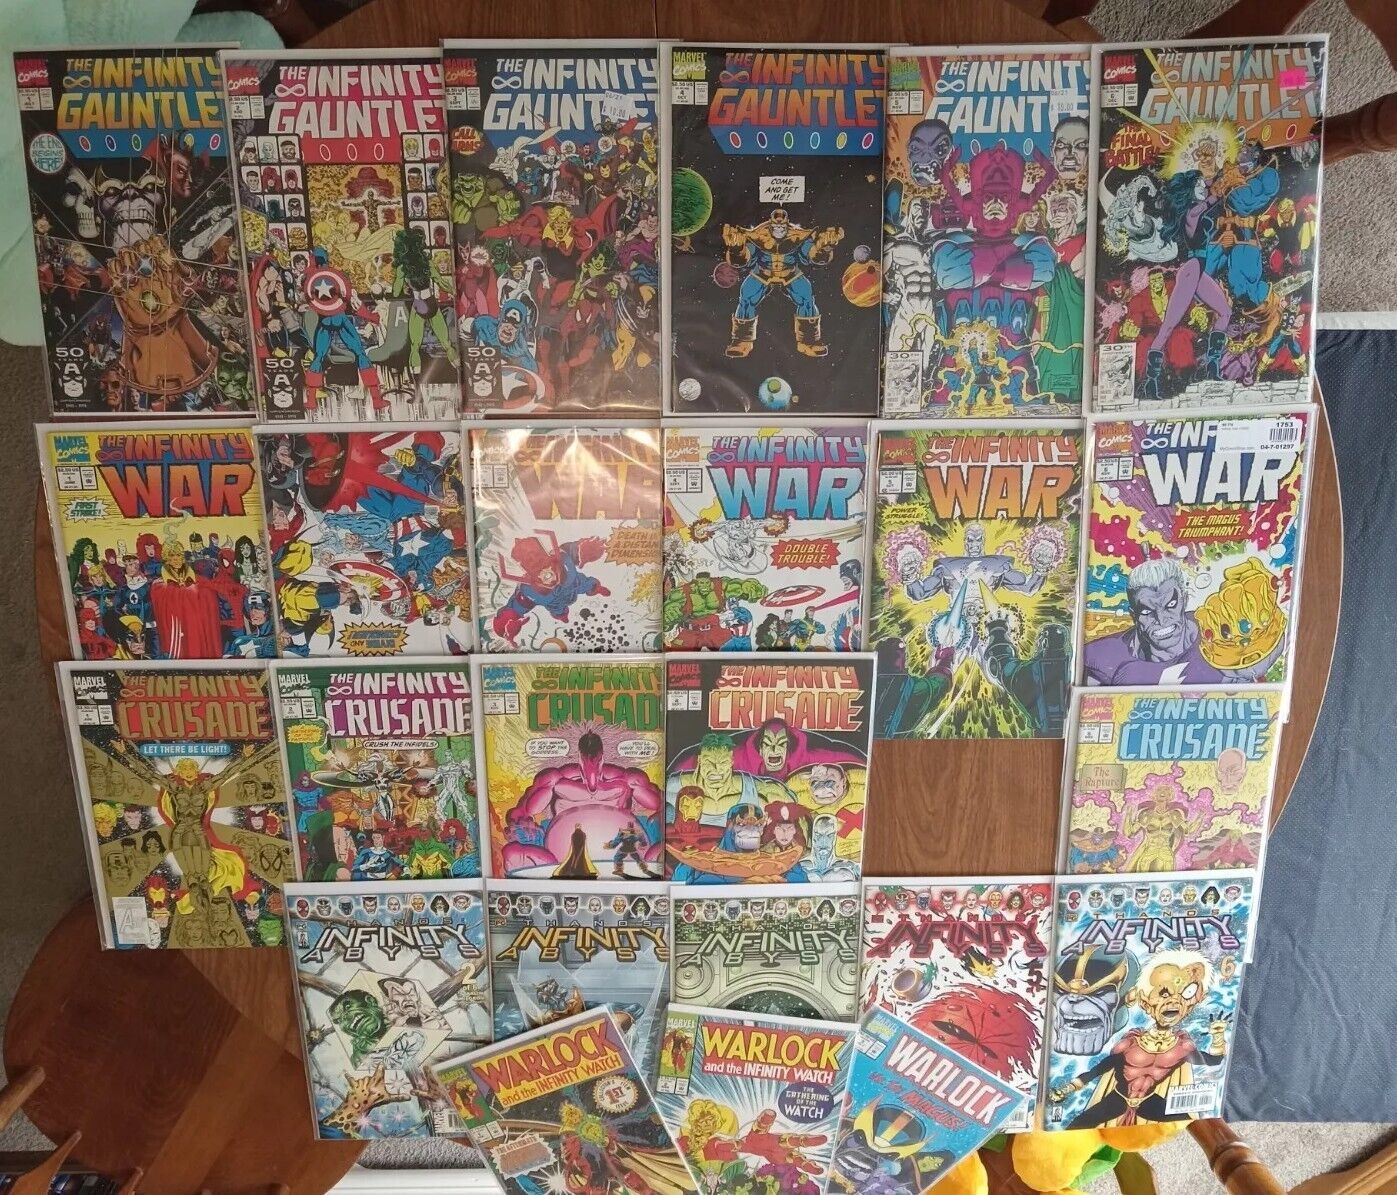 INFINITY GAUNTLET  1-6, WAR 1-6, Complete Sets, CRUSADE 1-4 6, ABYSS 2-6, Extras